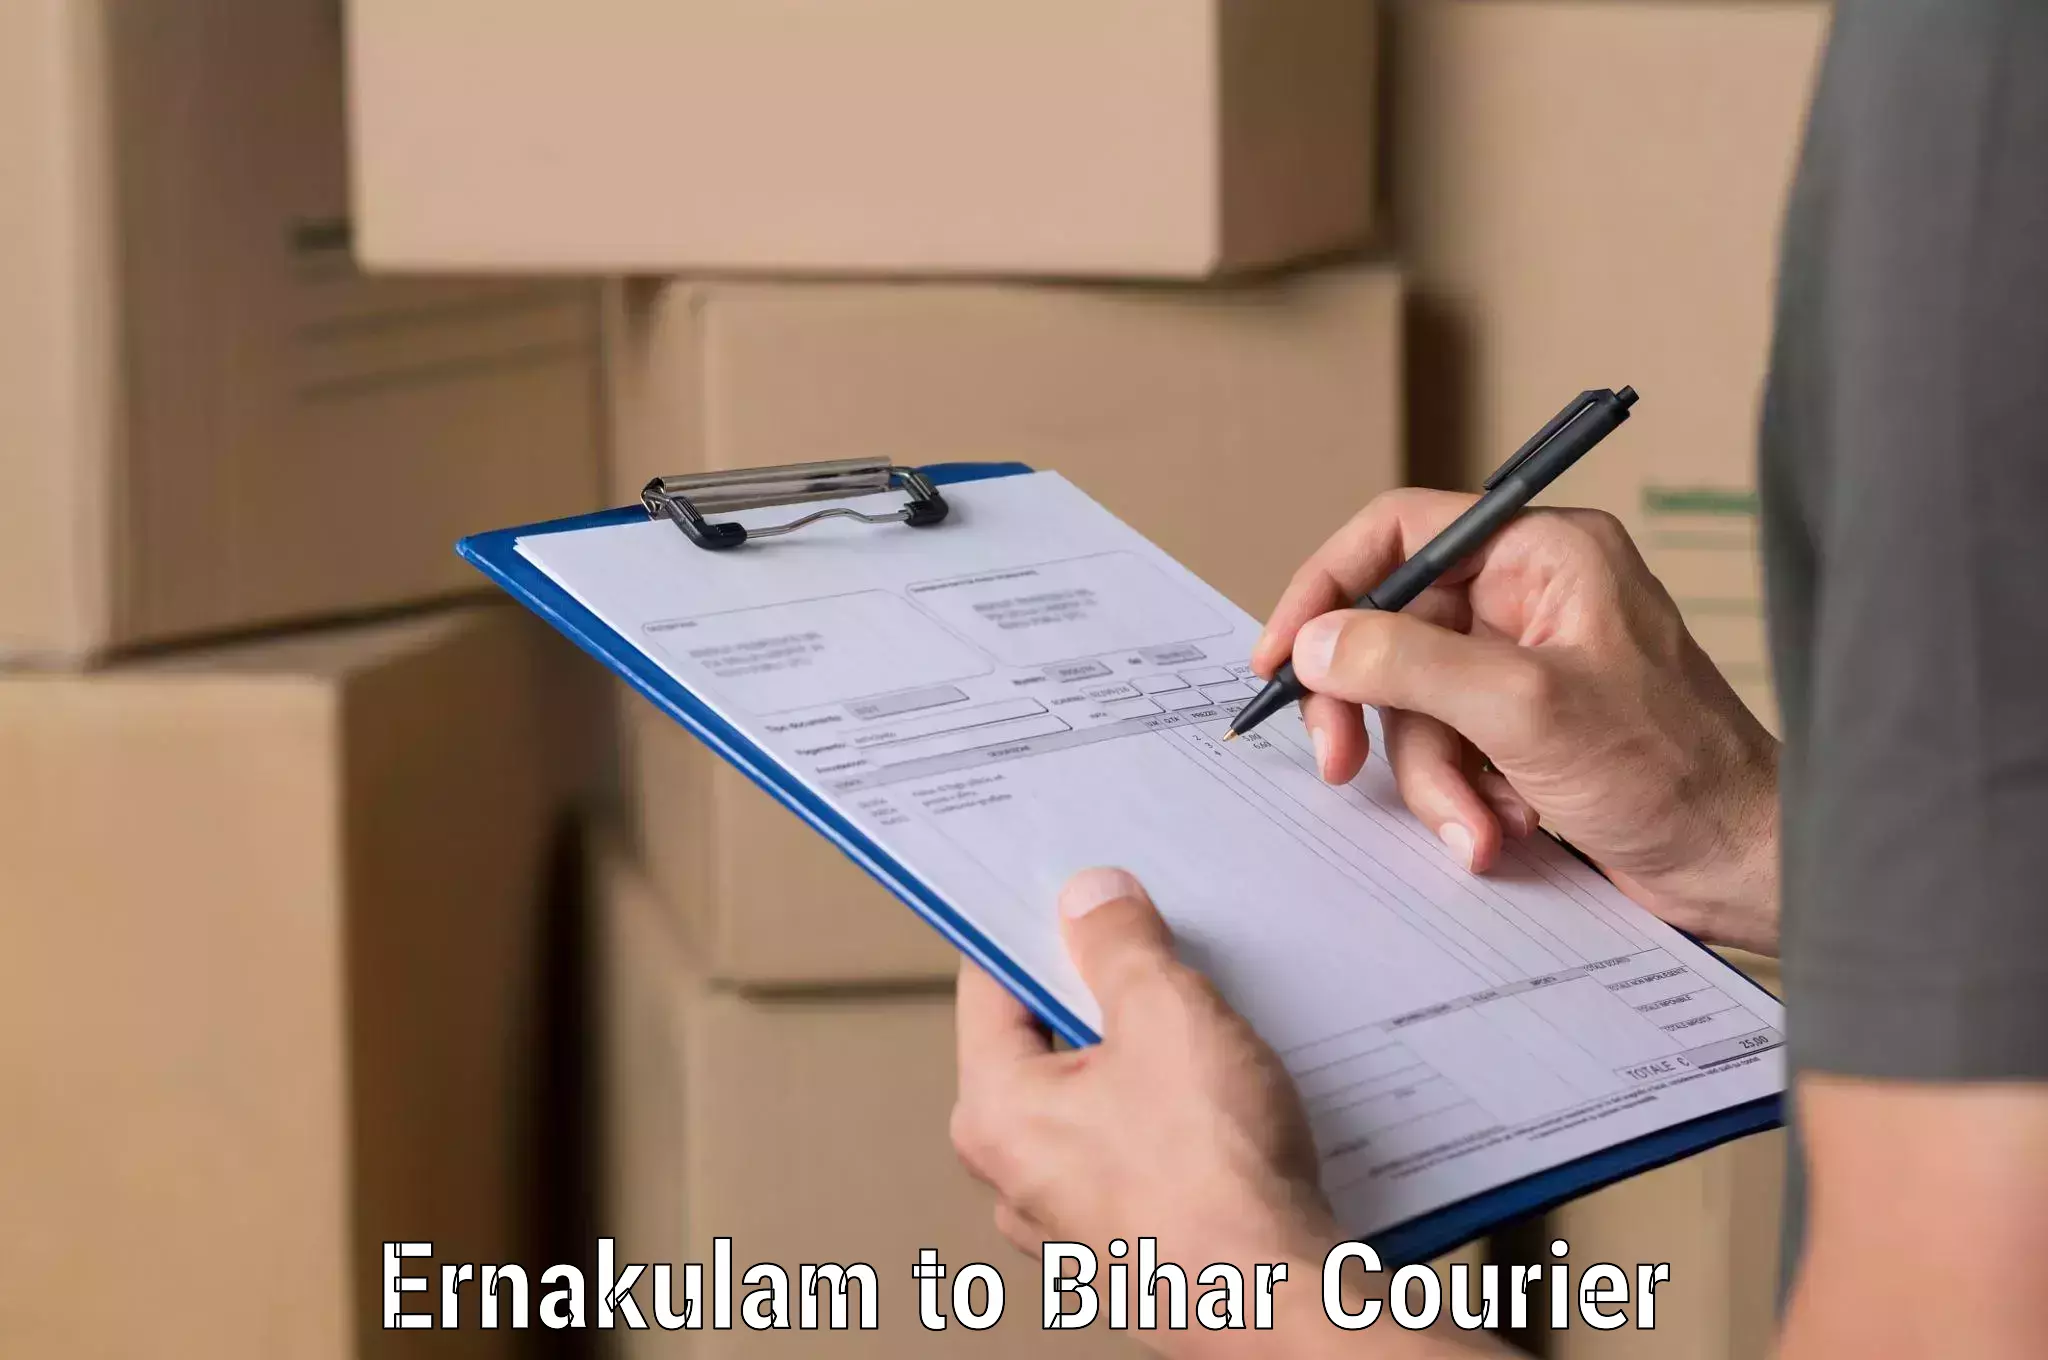 Courier services in Ernakulam to Sheikhpura